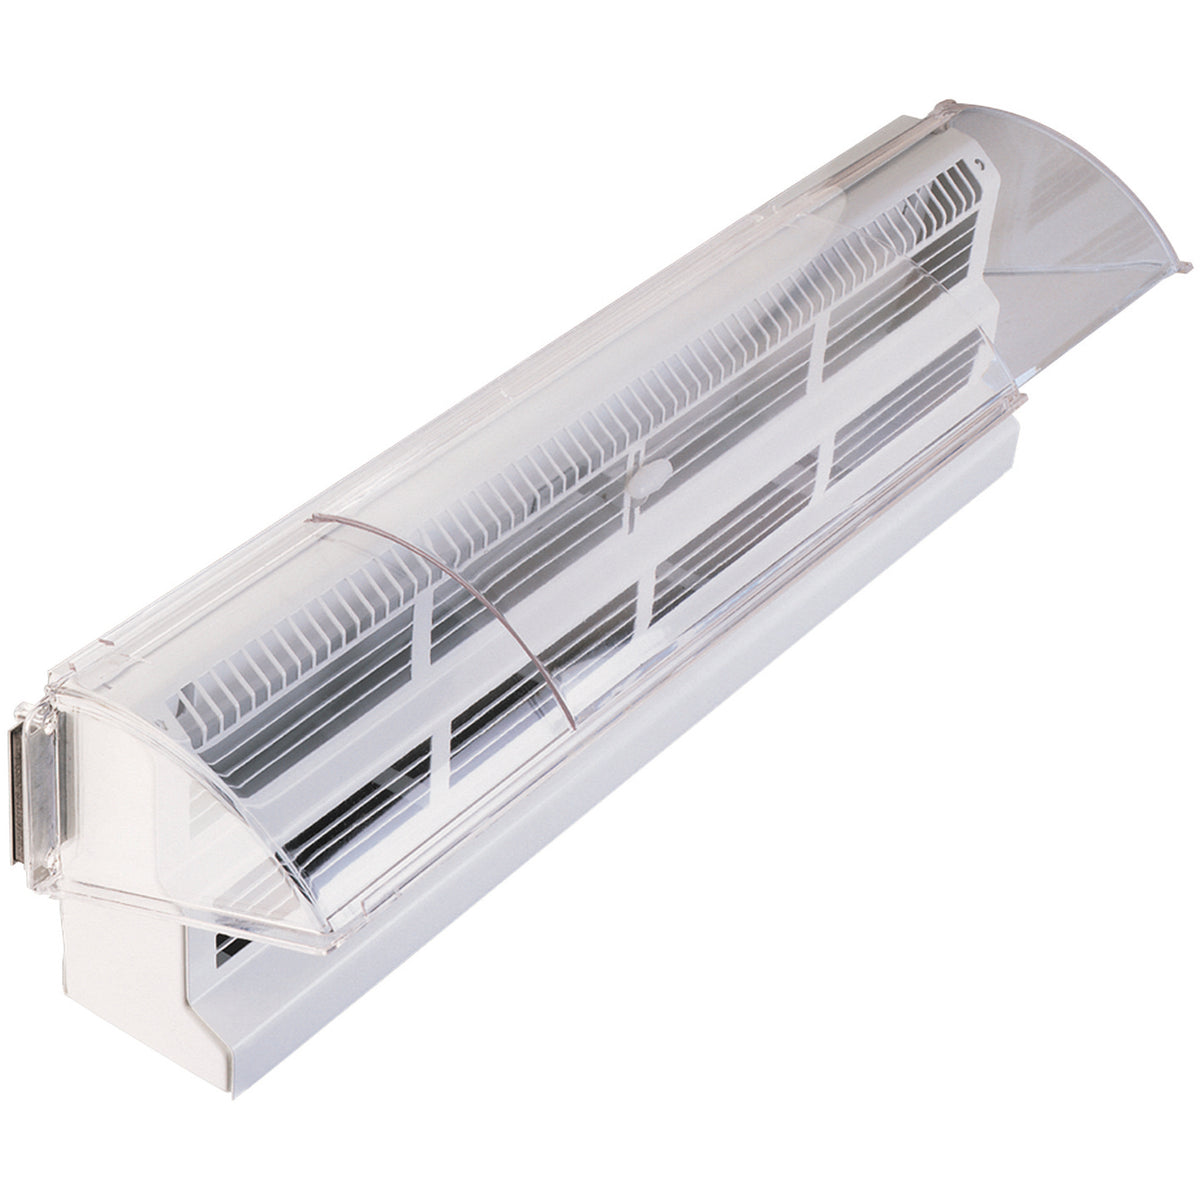 buy deflectors at cheap rate in bulk. wholesale & retail heat & cooling parts & supplies store.